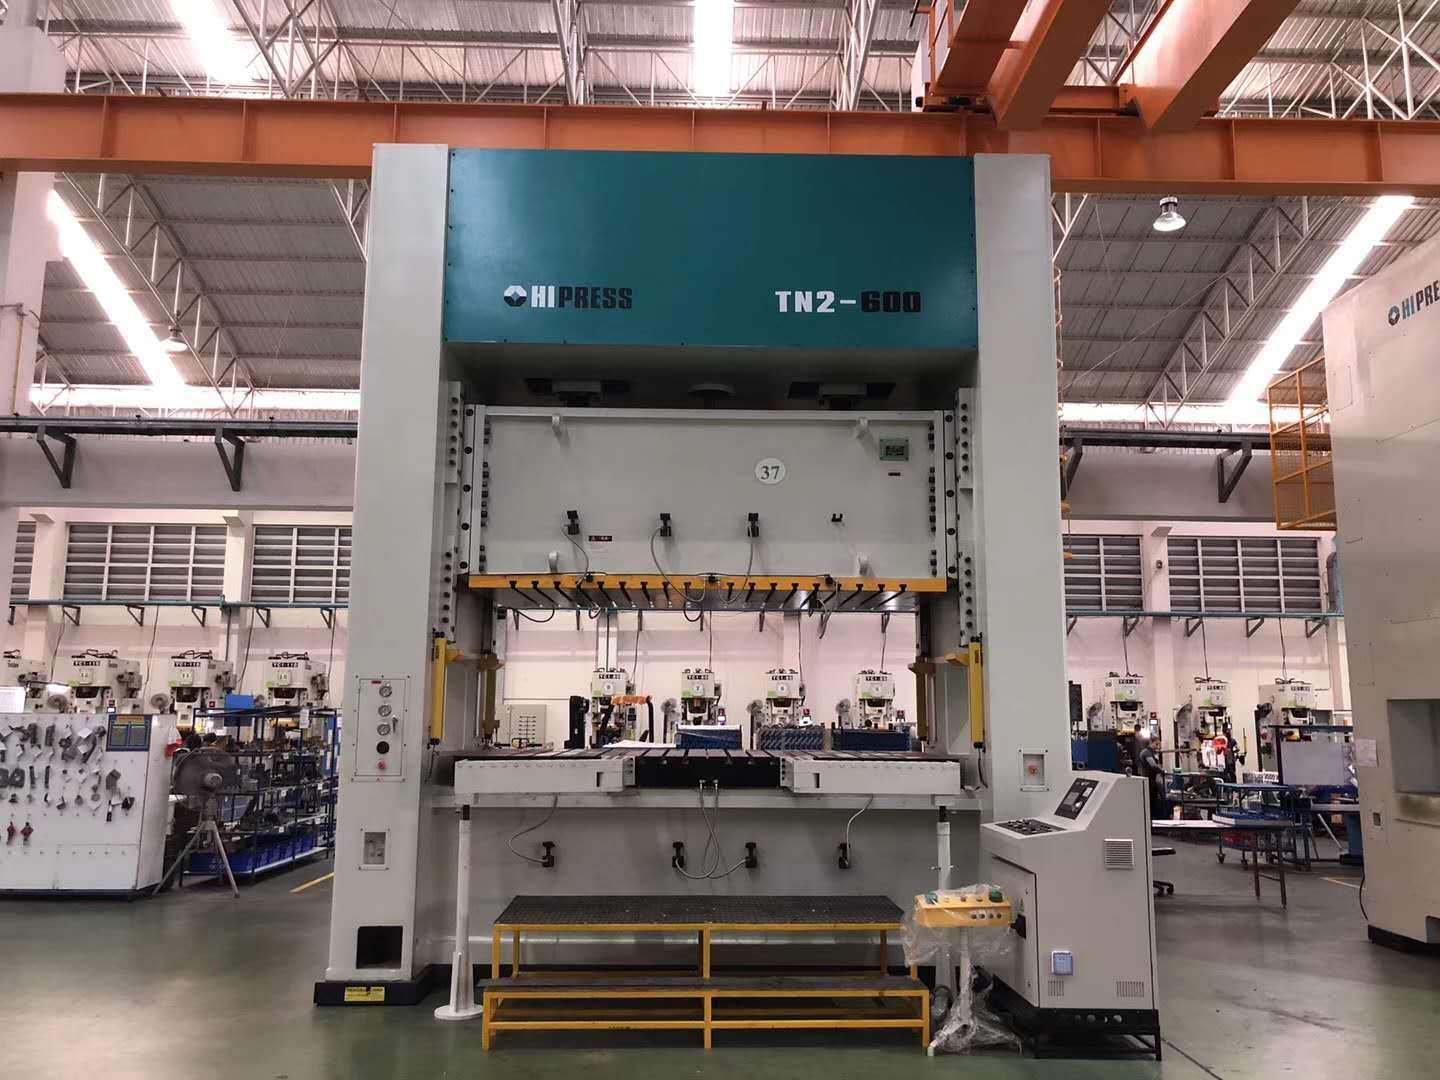 A double-sided safety light curtain for a punch press could be a great safety measure to prevent accidents and injuries